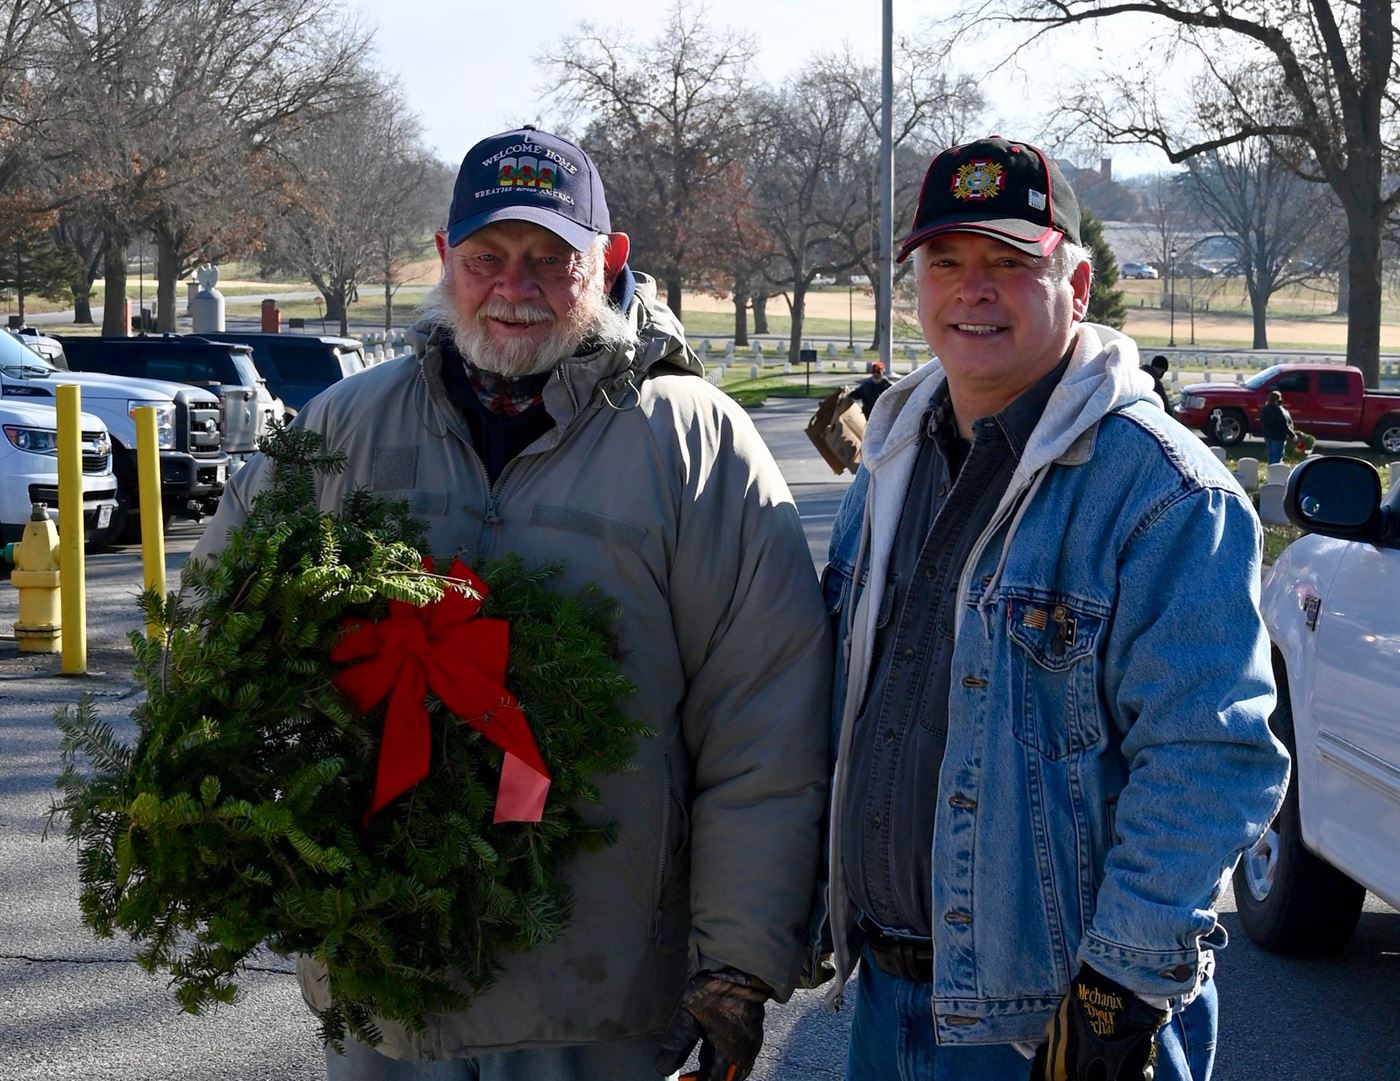 Col. (Ret.) Lynn Rolf, Jr., left, and CGSC Foundation President/CEO Rod Cox visit after laying wreaths on veterans’ graves Dec. 19, 2020. Rolf was representing VFW Post 56 in Fort Leavenworth and has worked on the Wreaths Across America project for several years.